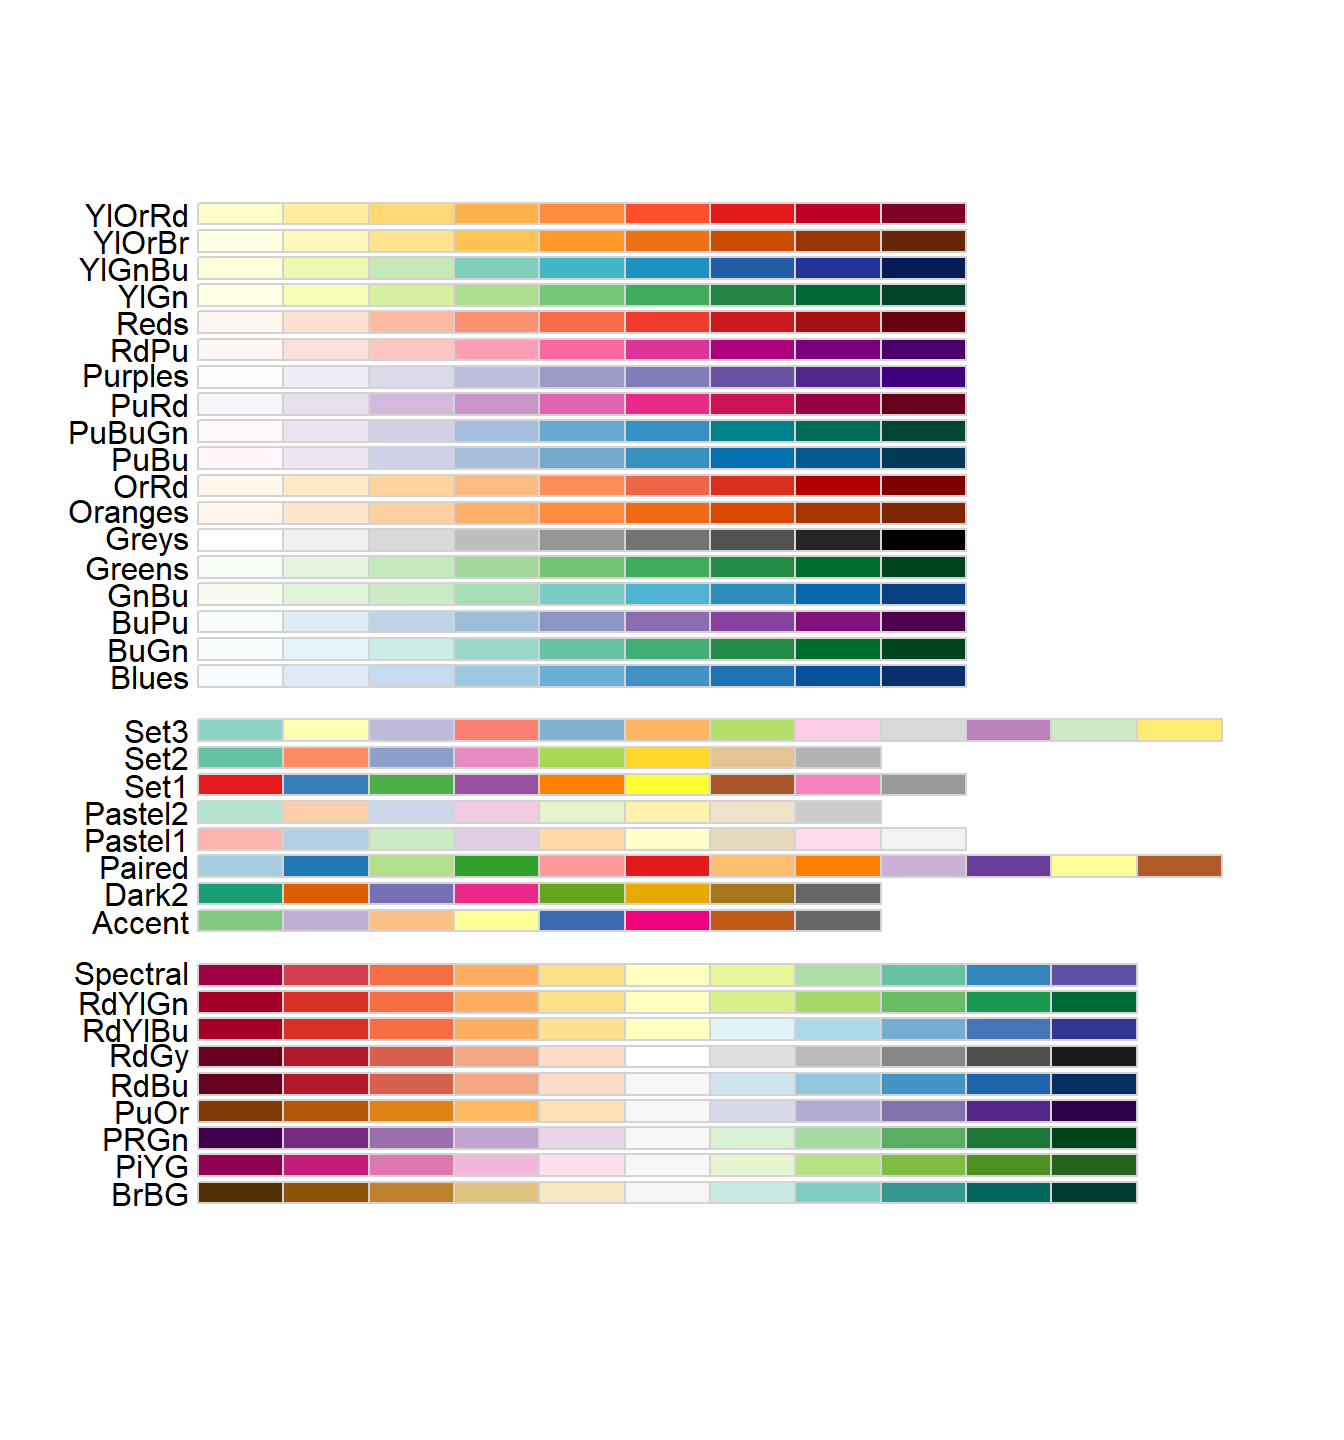 All the palettes available in the RColorBrewer package.